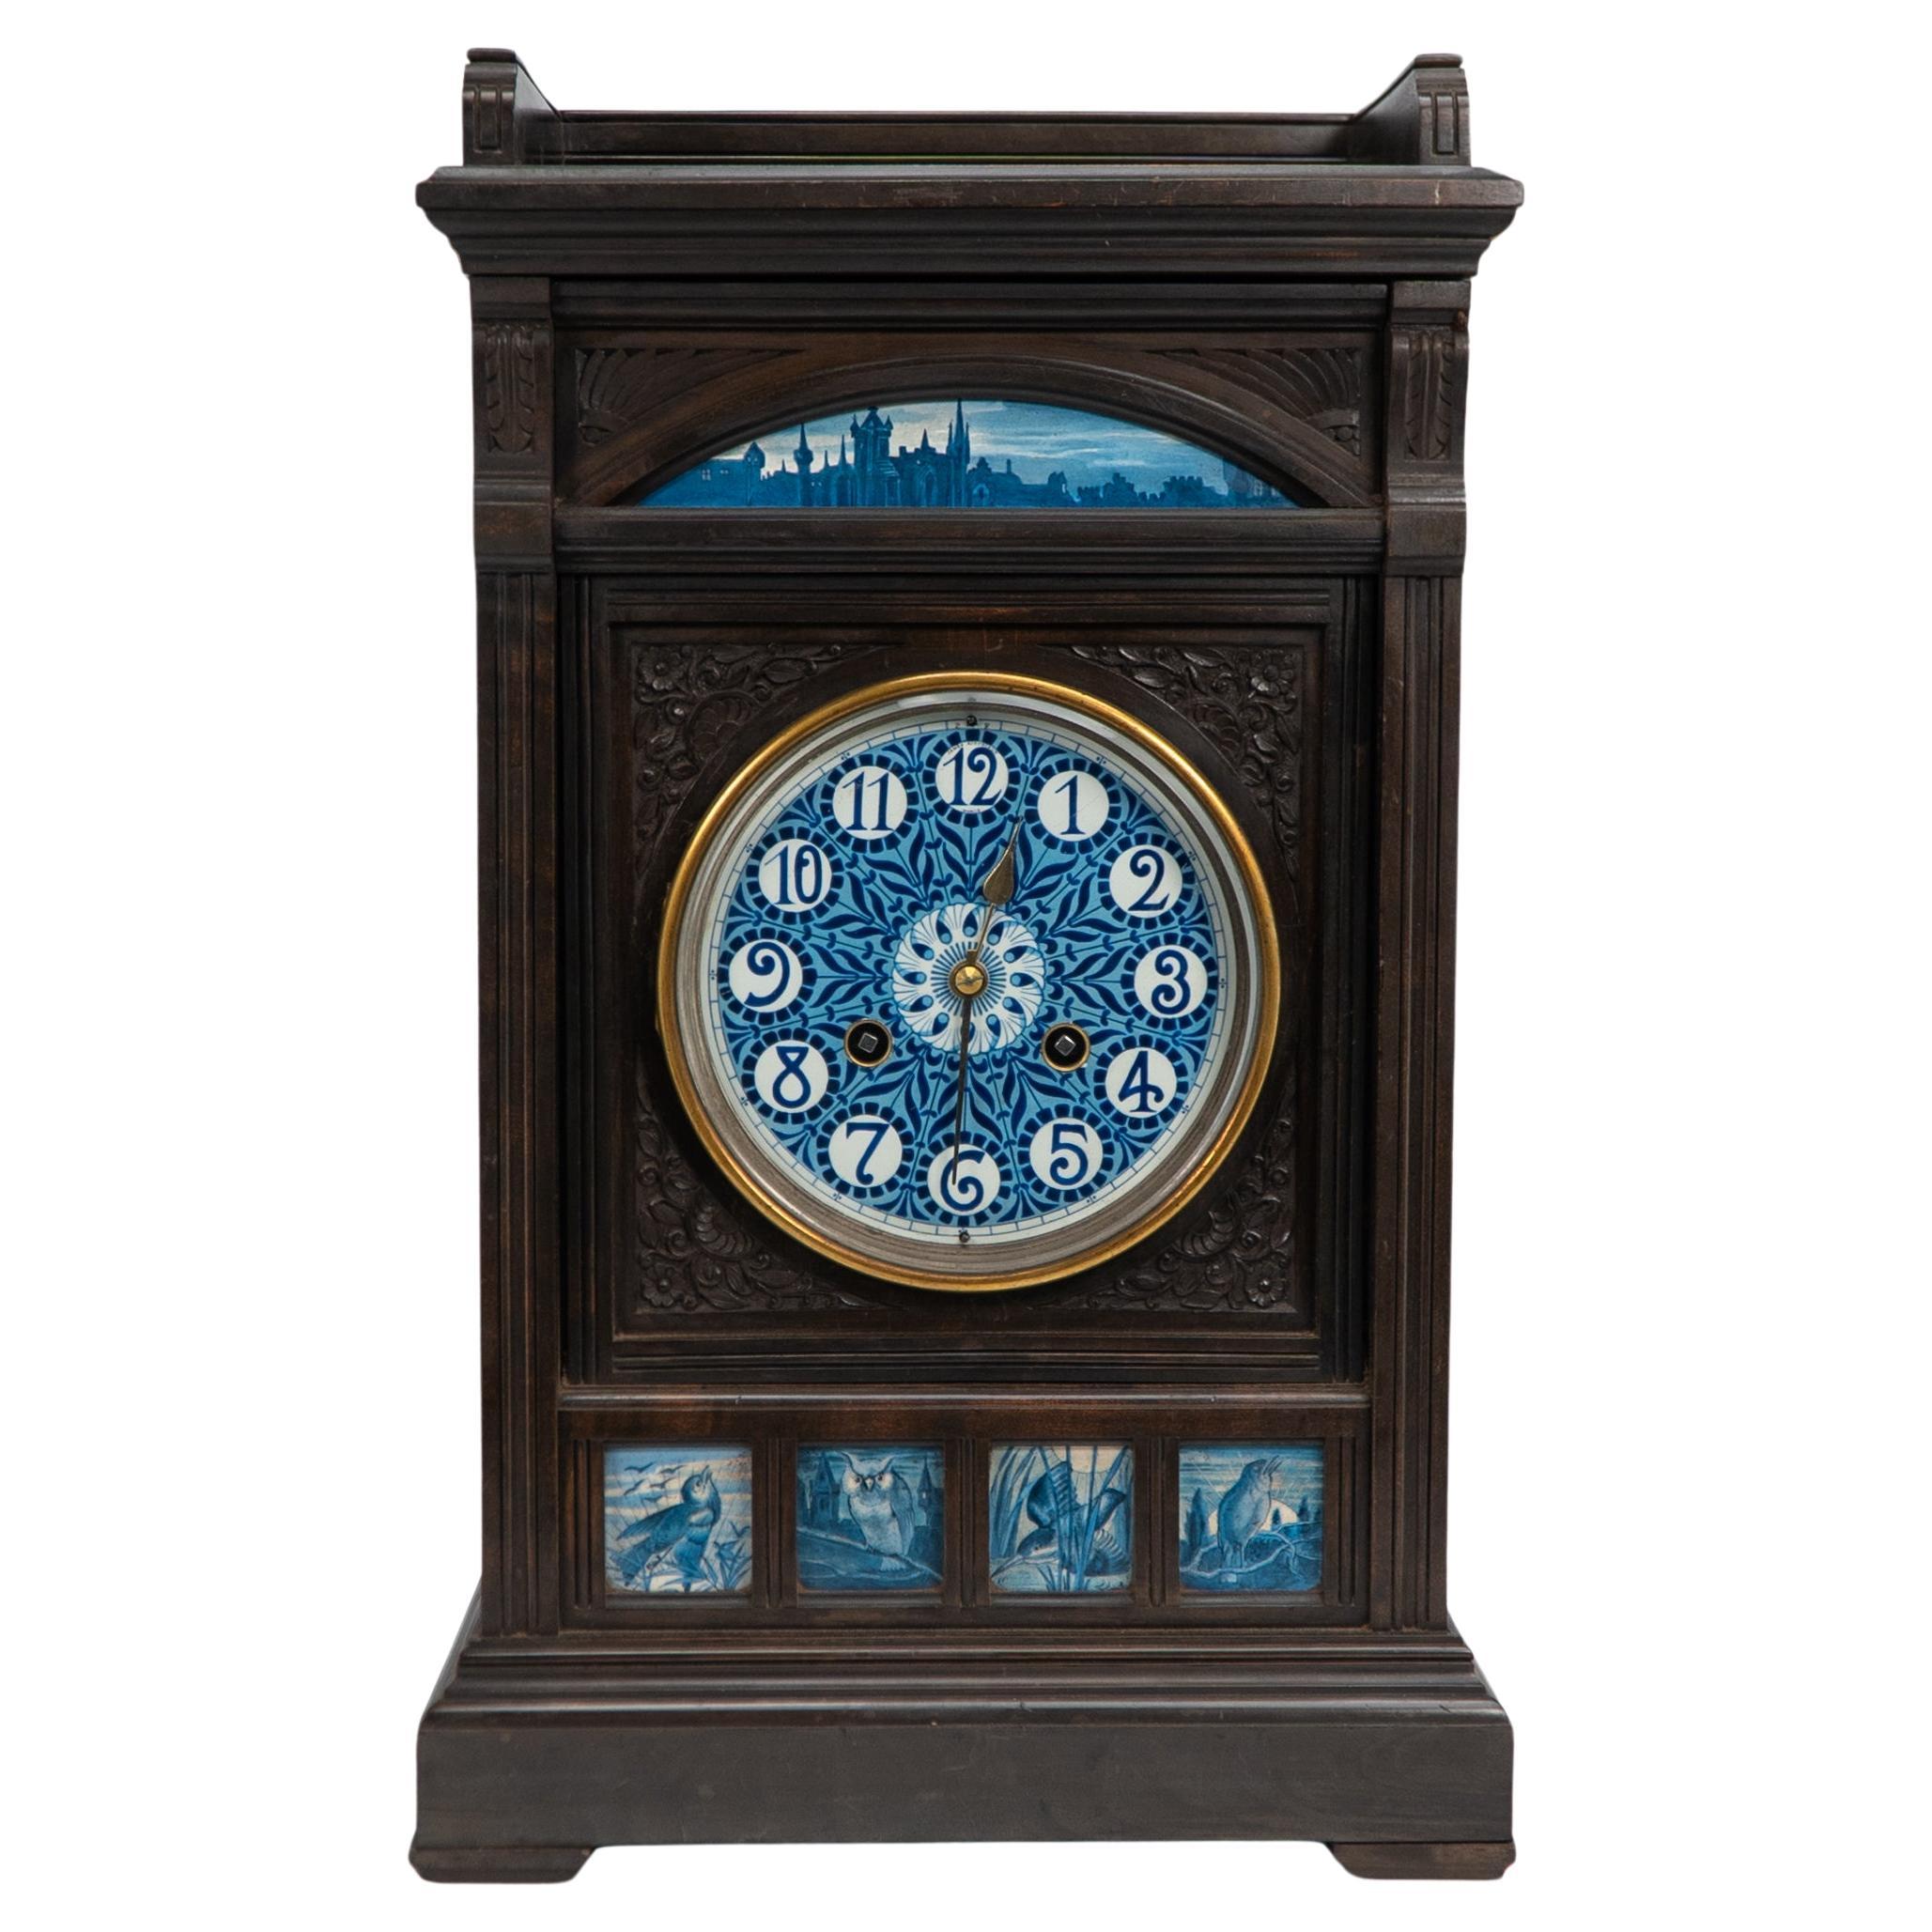 James Aitchison Aesthetic Movement mantel or bracket clock with Owls & Songbirds For Sale